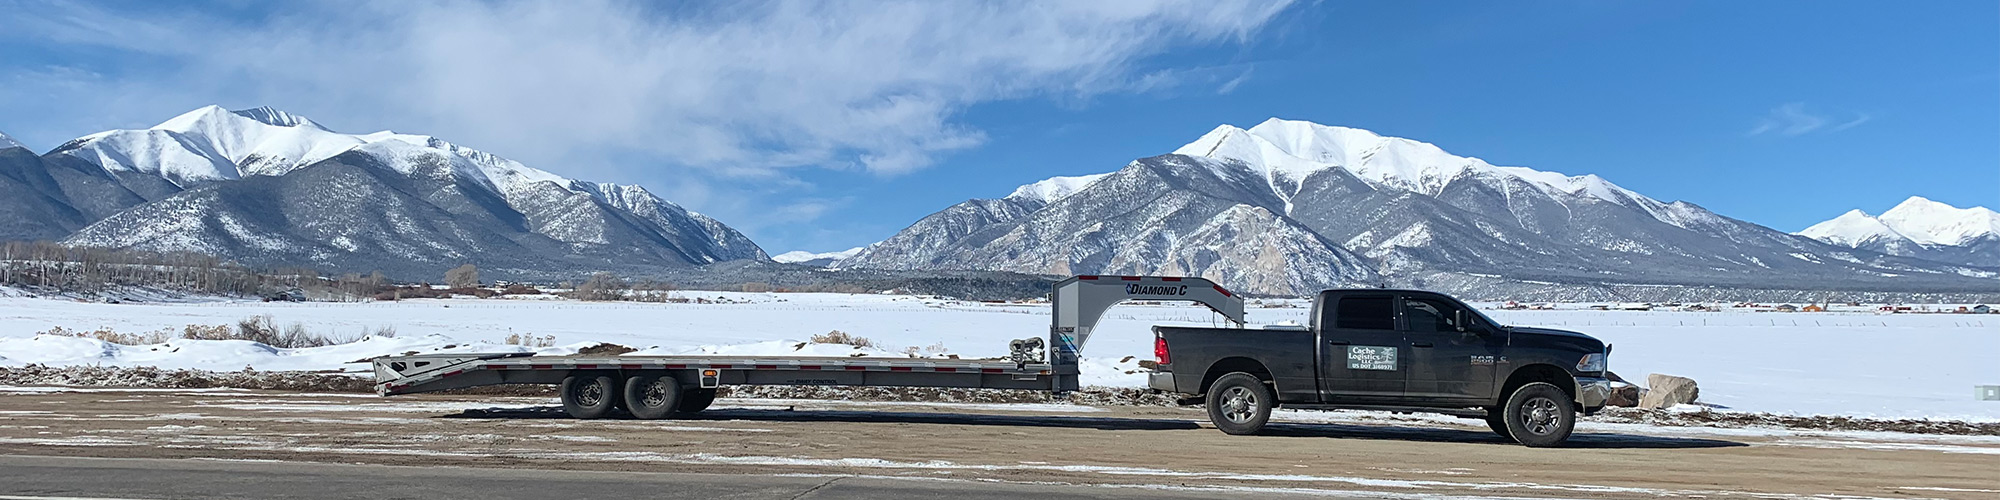 Scenic photo of a gooseneck trailer being pulled by a truck with mountains behind